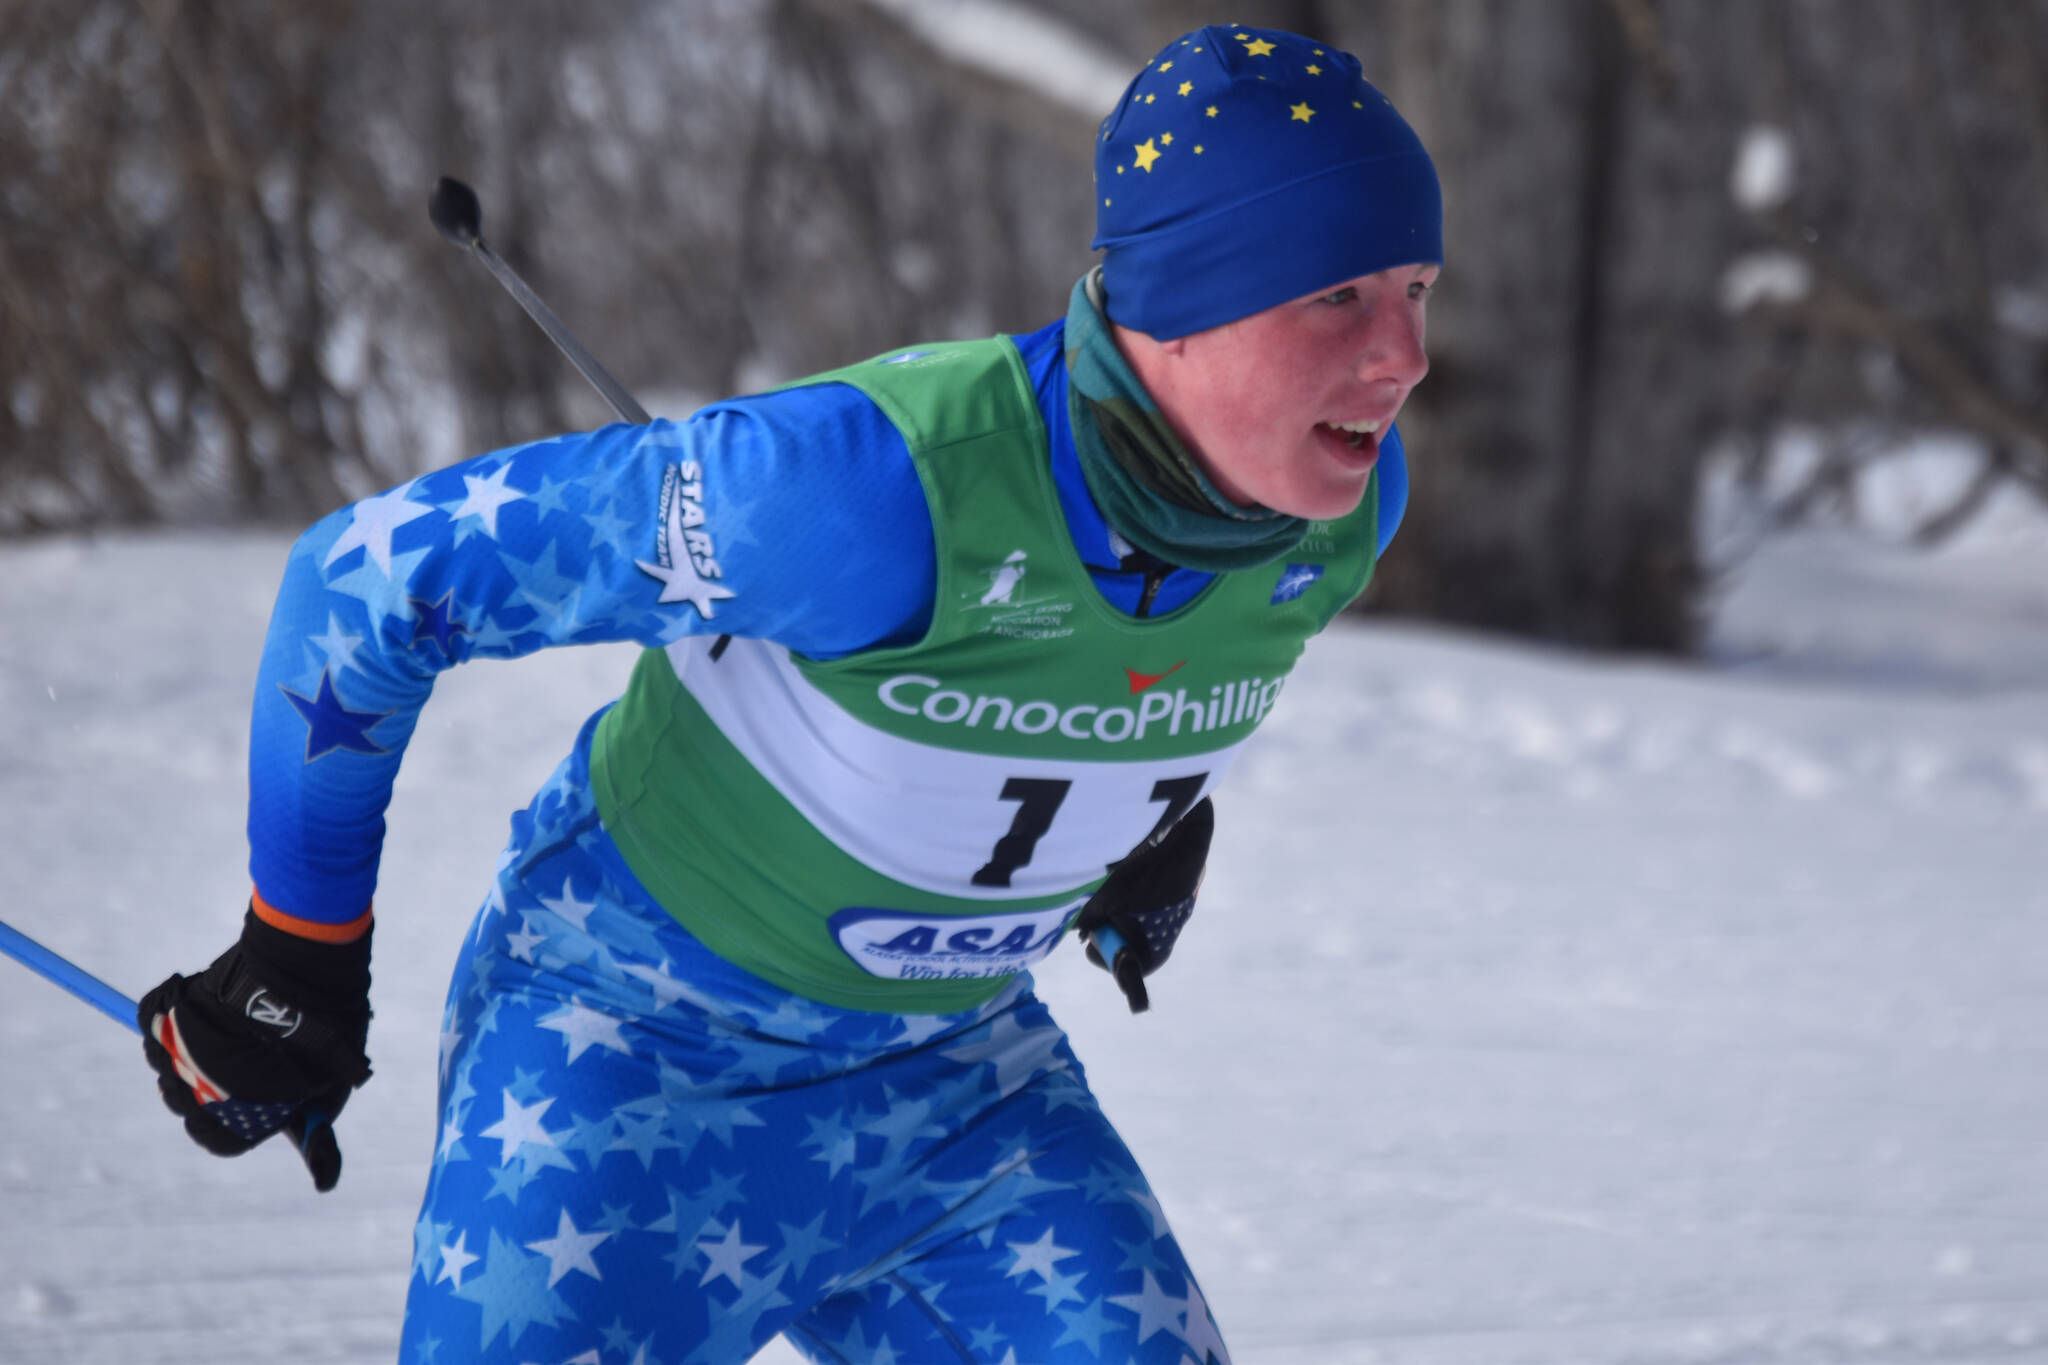 Bennjamin Abel, of Soldotna, pushes through the second leg of the boys 4x5-kilometer relay at the ASAA State Nordic Ski Championships at Kincaid Park in Anchorage, Alaska, on Saturday, Feb. 25, 2023. (Jake Dye/Peninsula Clarion)